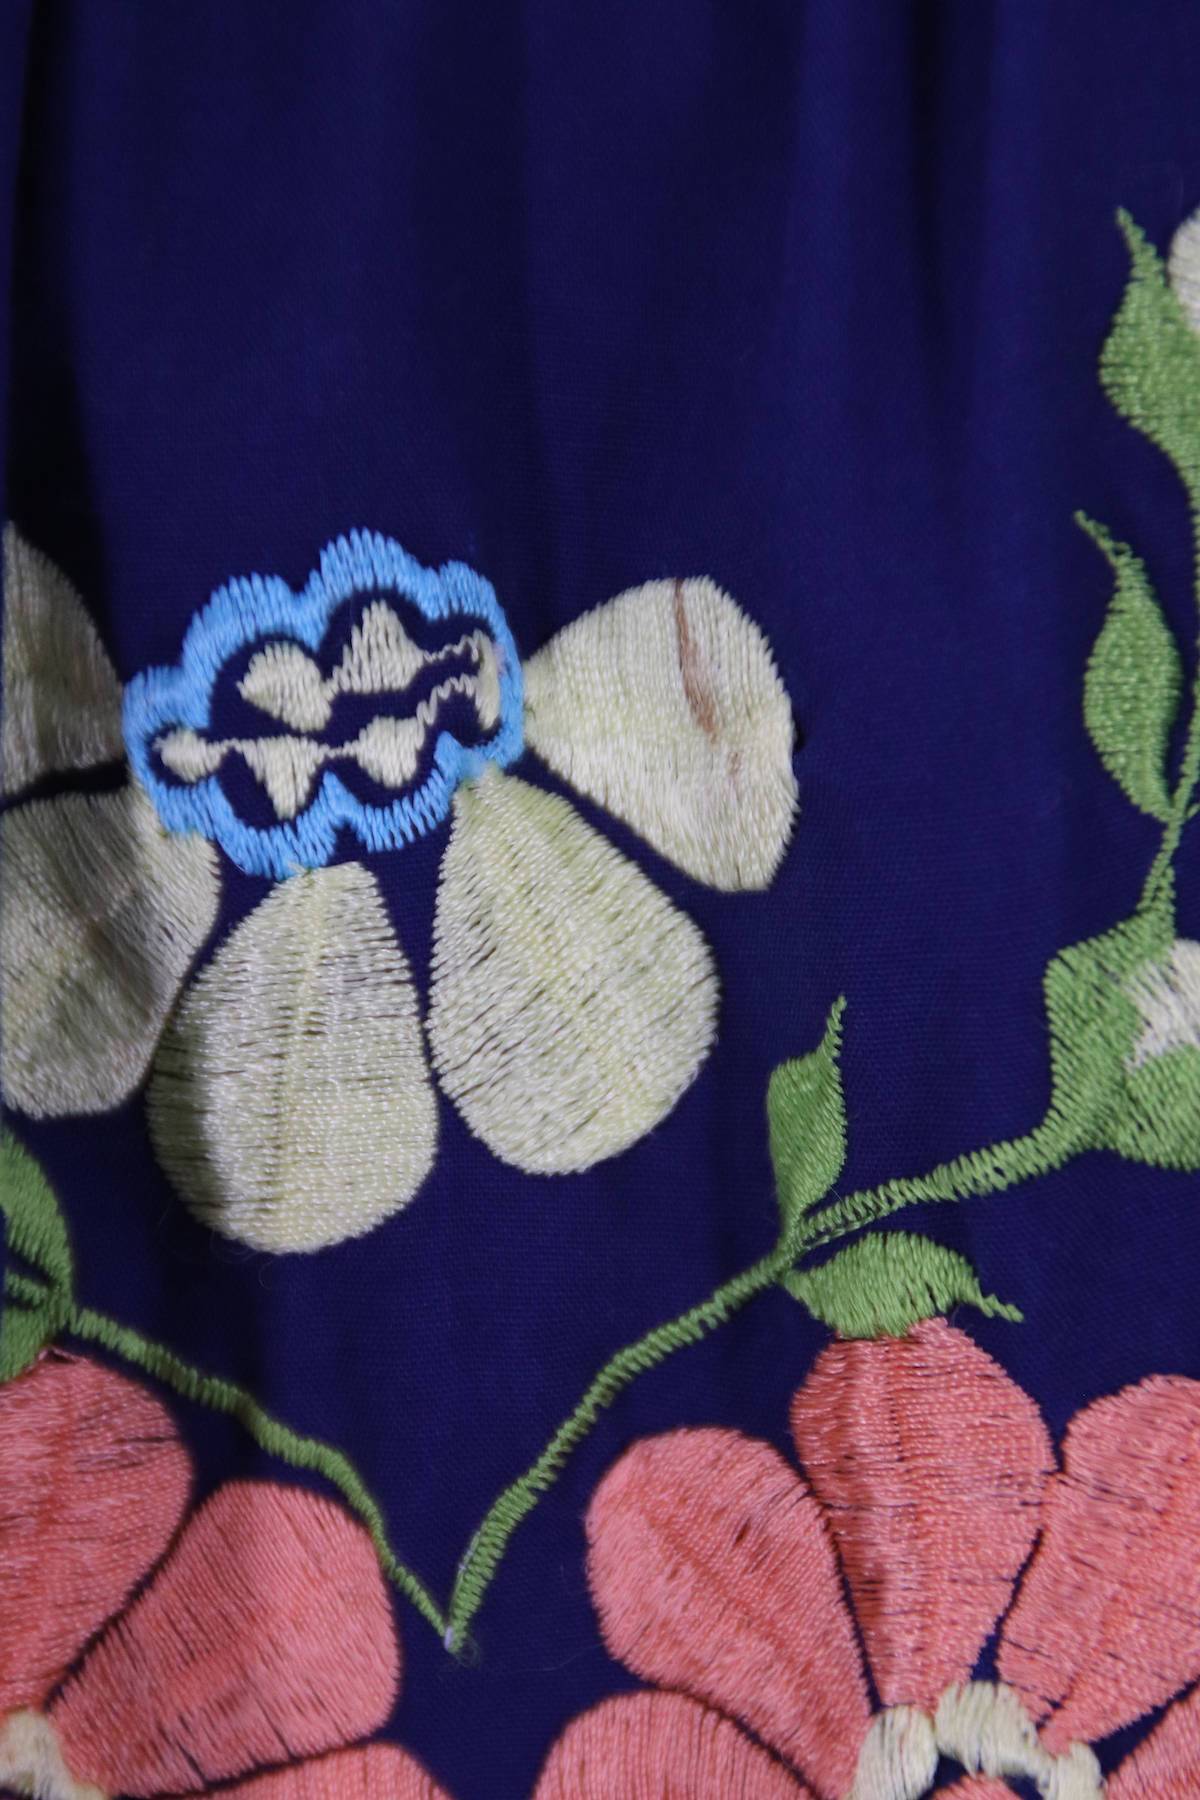 Vintage 1970s Mexican Embroidered Tunic / Navy Blue Floral / Oaxacan Embroidery - ThisBlueBird